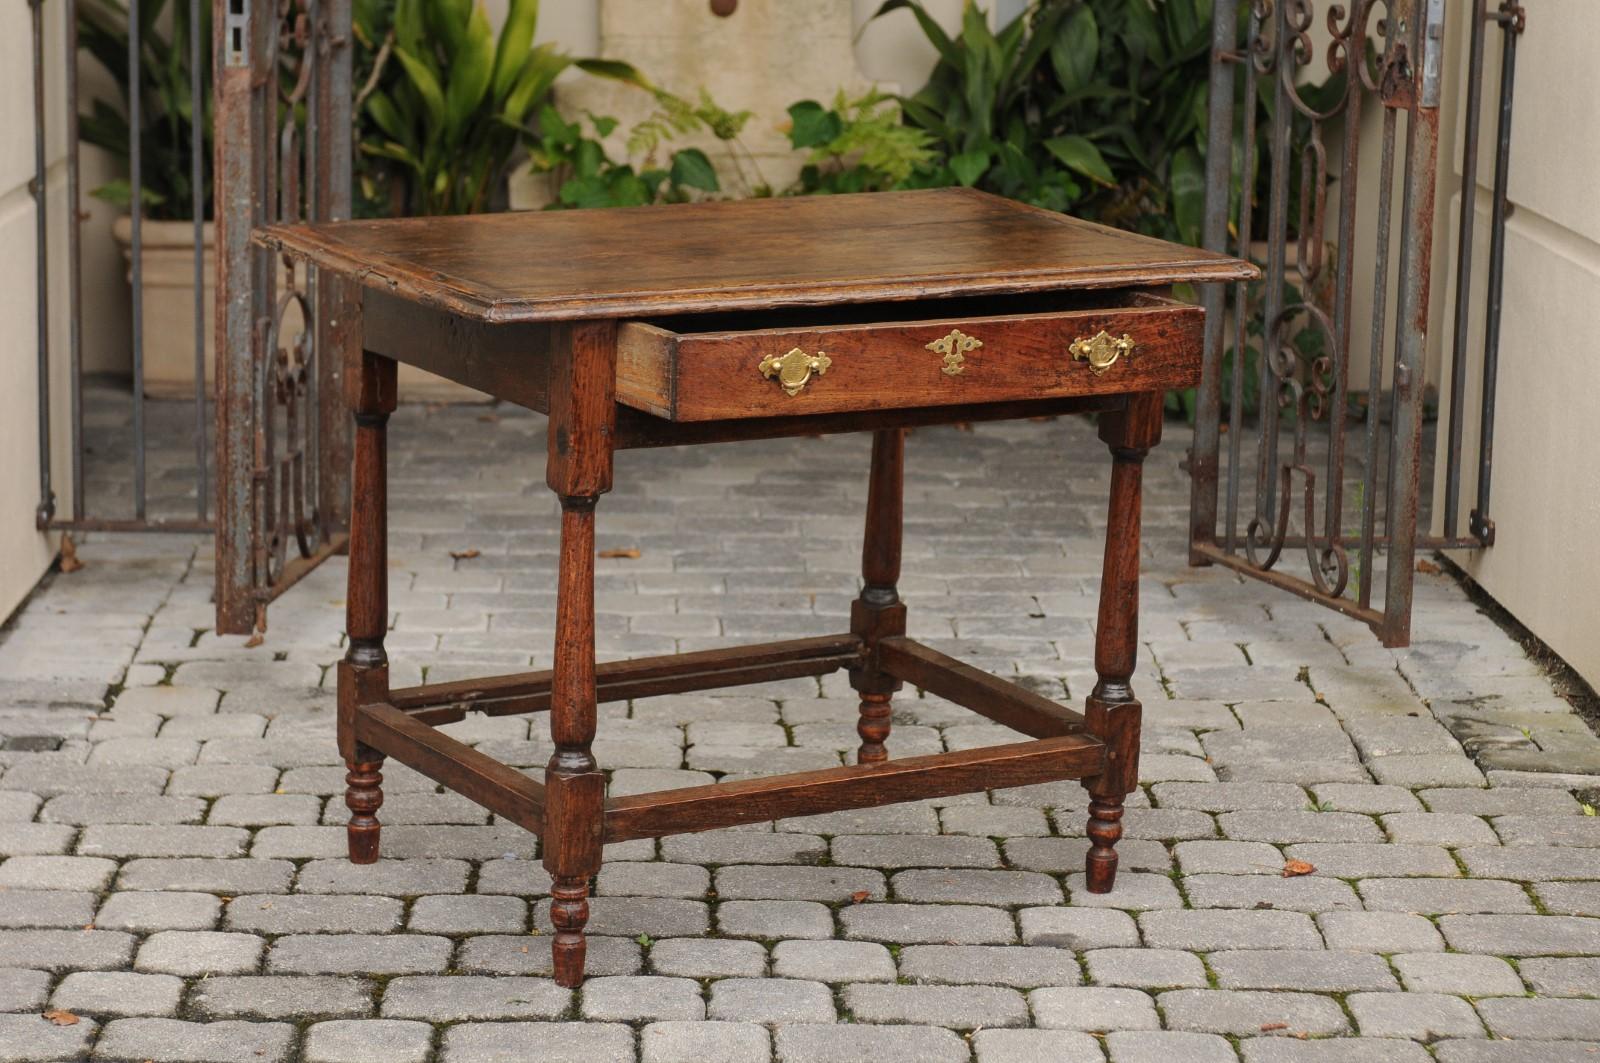 English 1860s Oak Side Table with Drawer, Turned Baluster Legs and Stretcher (Eichenholz)